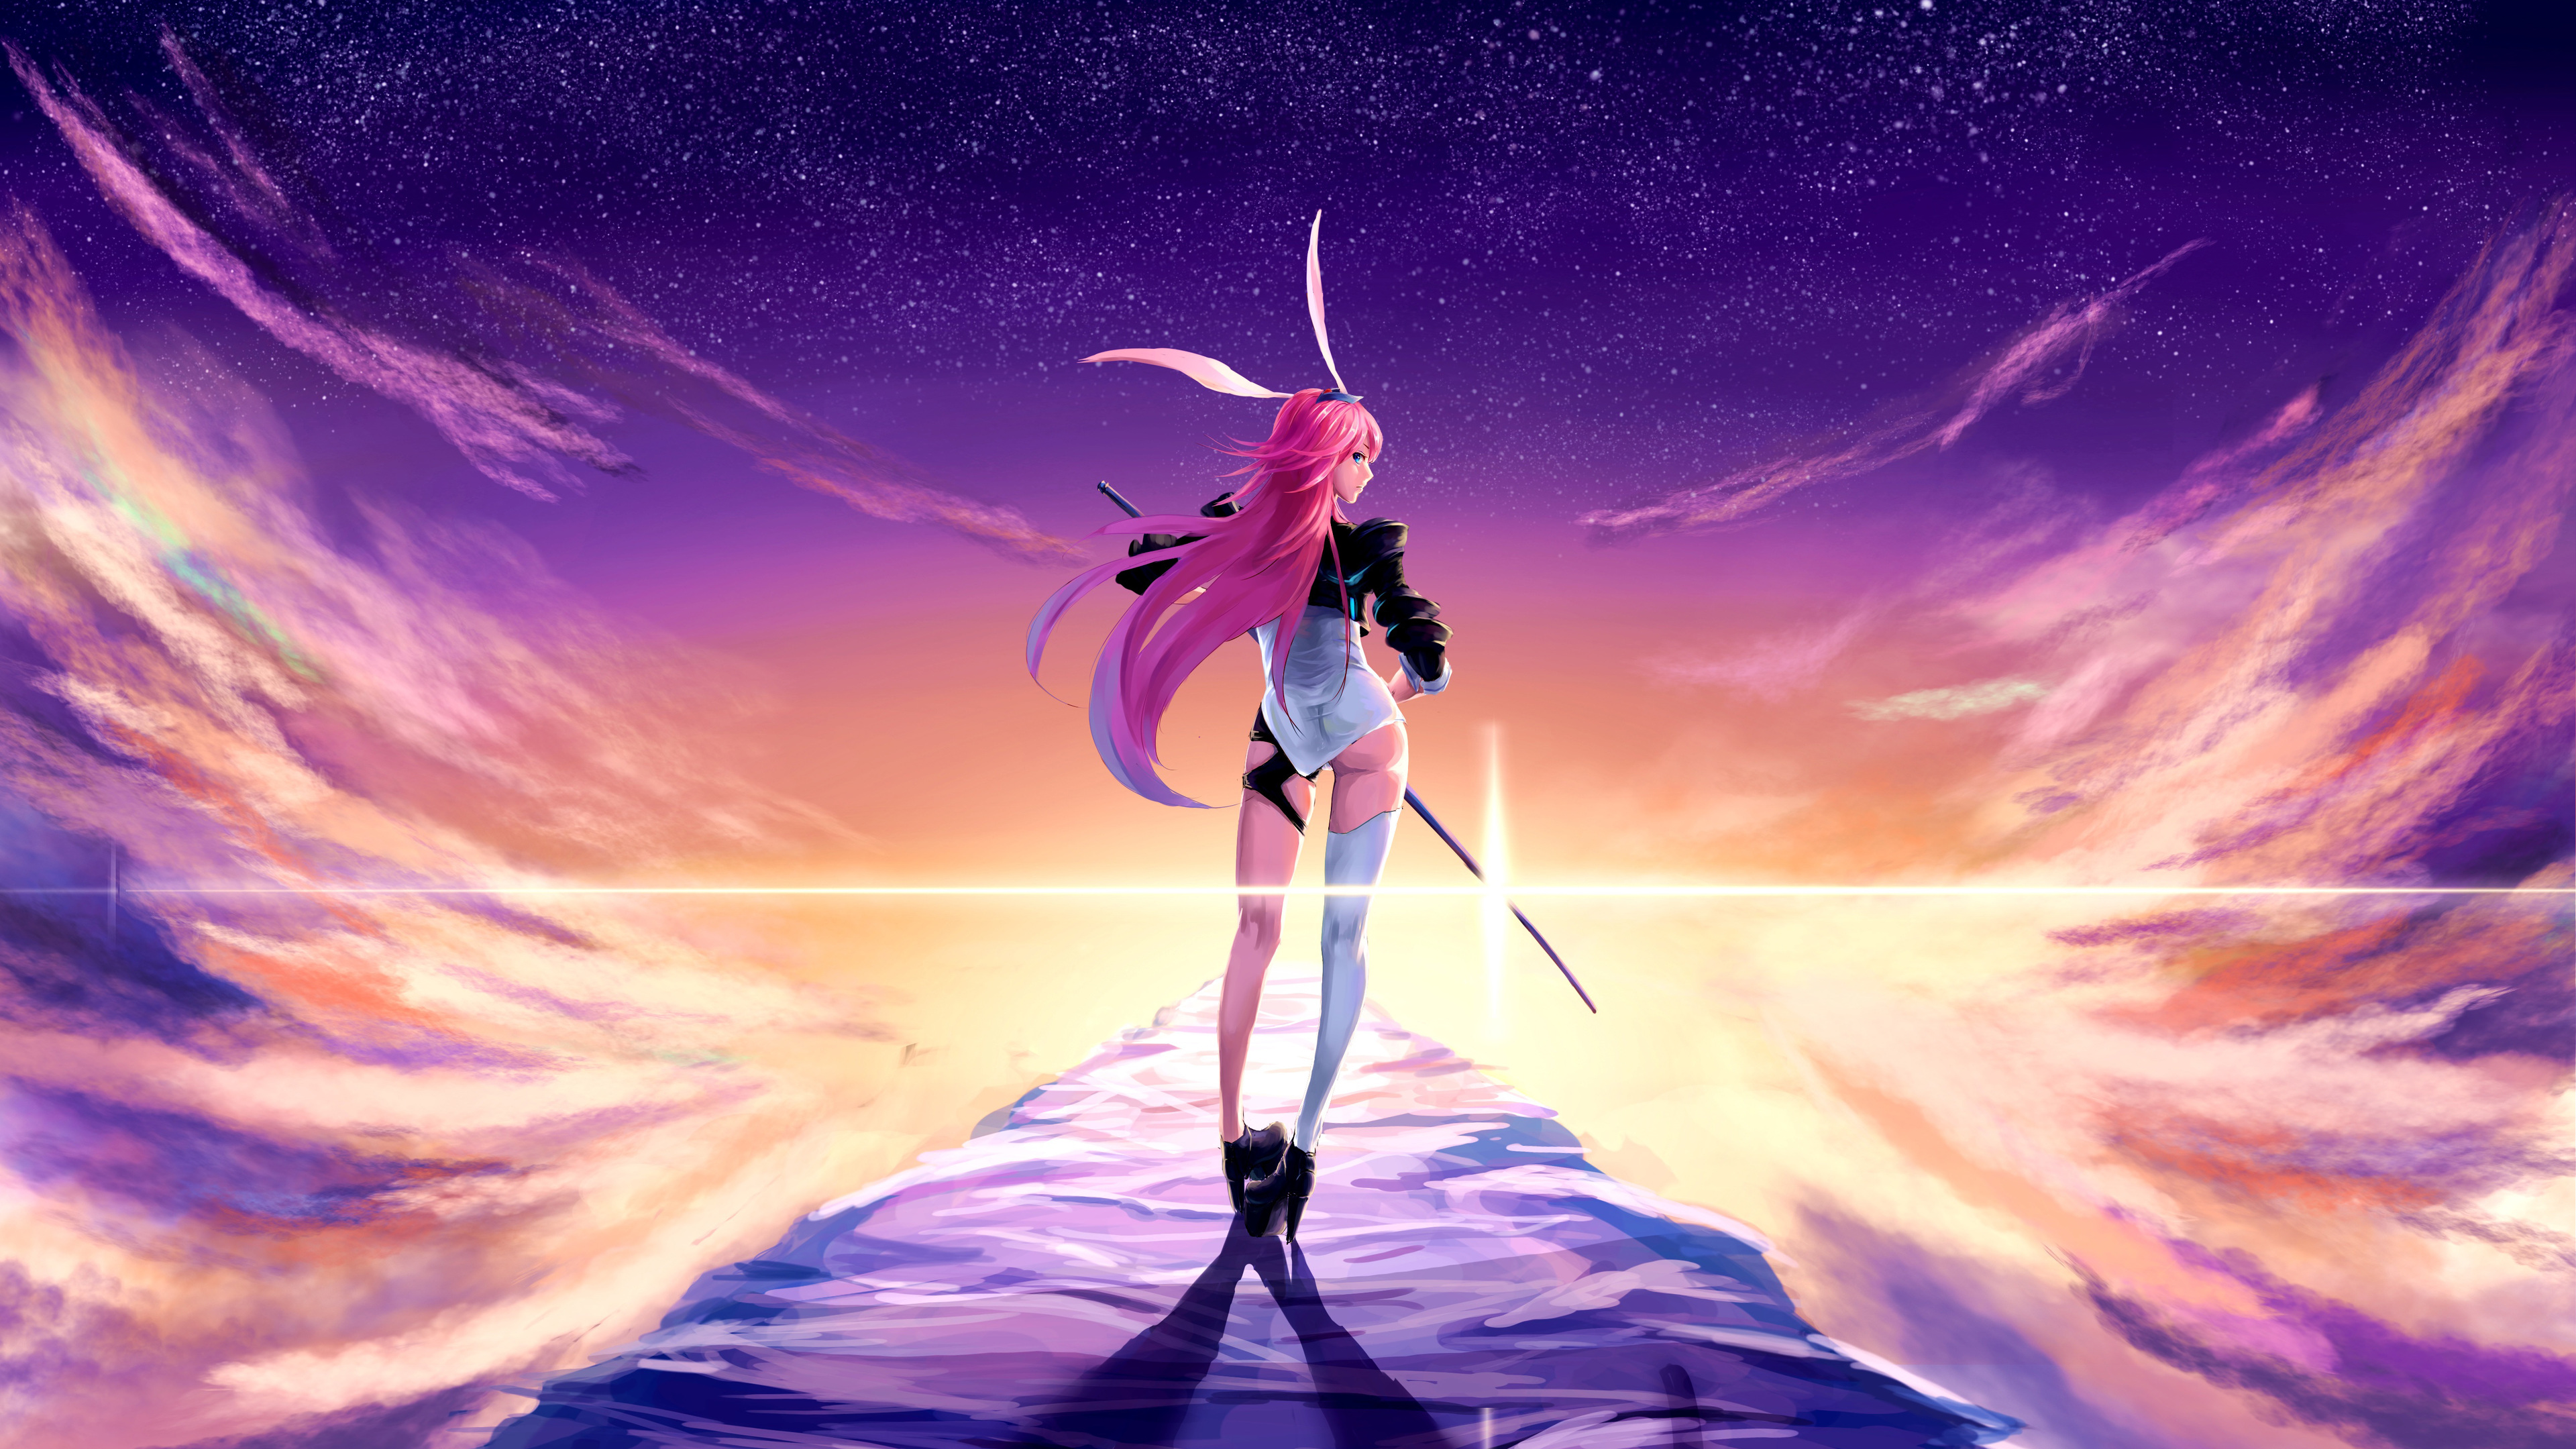 Yae Sakura Honkai Impact: Yae Sakura is one of the most beloved characters in the popular game Honkai Impact. With her powerful abilities and stunning appearance, she has won the hearts of many fans around the world. If you are a fan of this amazing character or just love the game, you won\'t want to miss the amazing image we have for you.